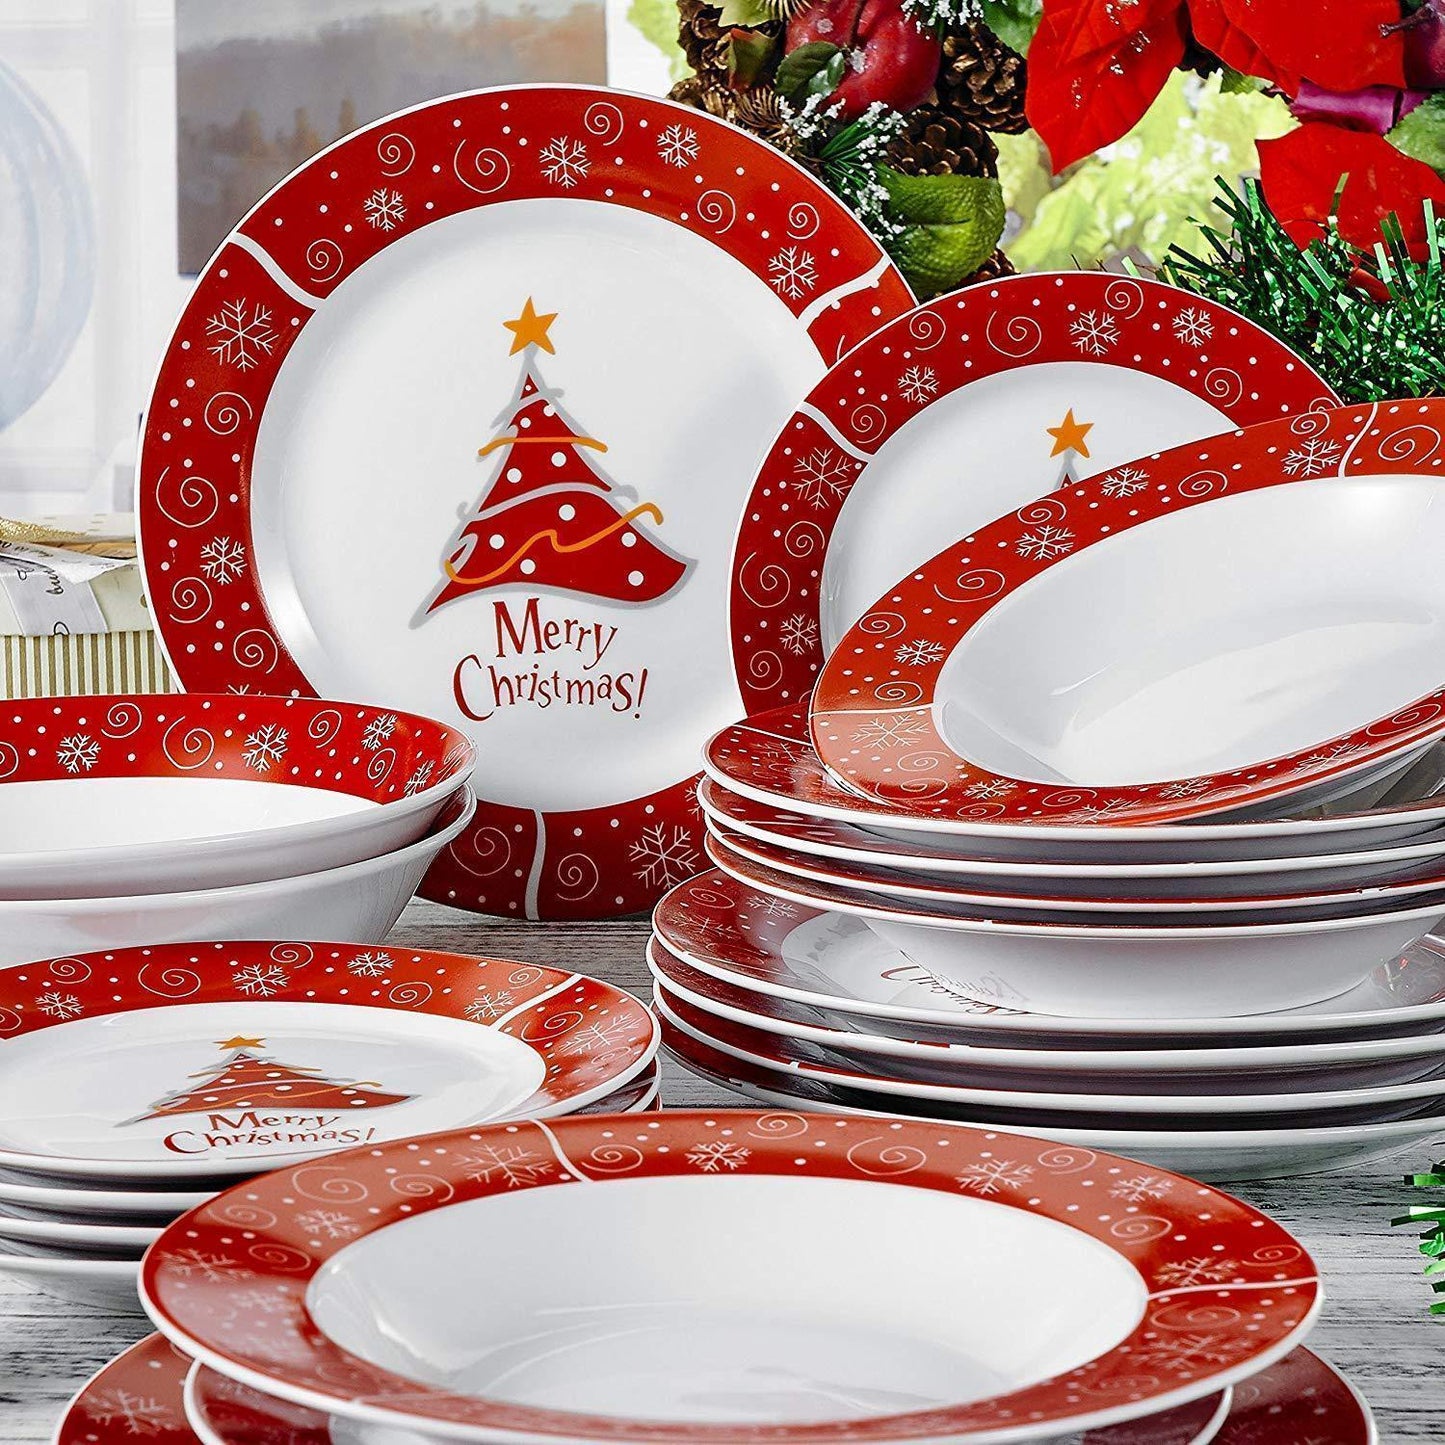 20-Piece Christmas Porcelain Dinnerware Set - Nordic Side - 20, and, Bowl, Ceramic, Cereal, Christmas, Dessert, Dinnerware, Piece, Plate, PlateDinner, PlateSoup, Porcelain, Set, with